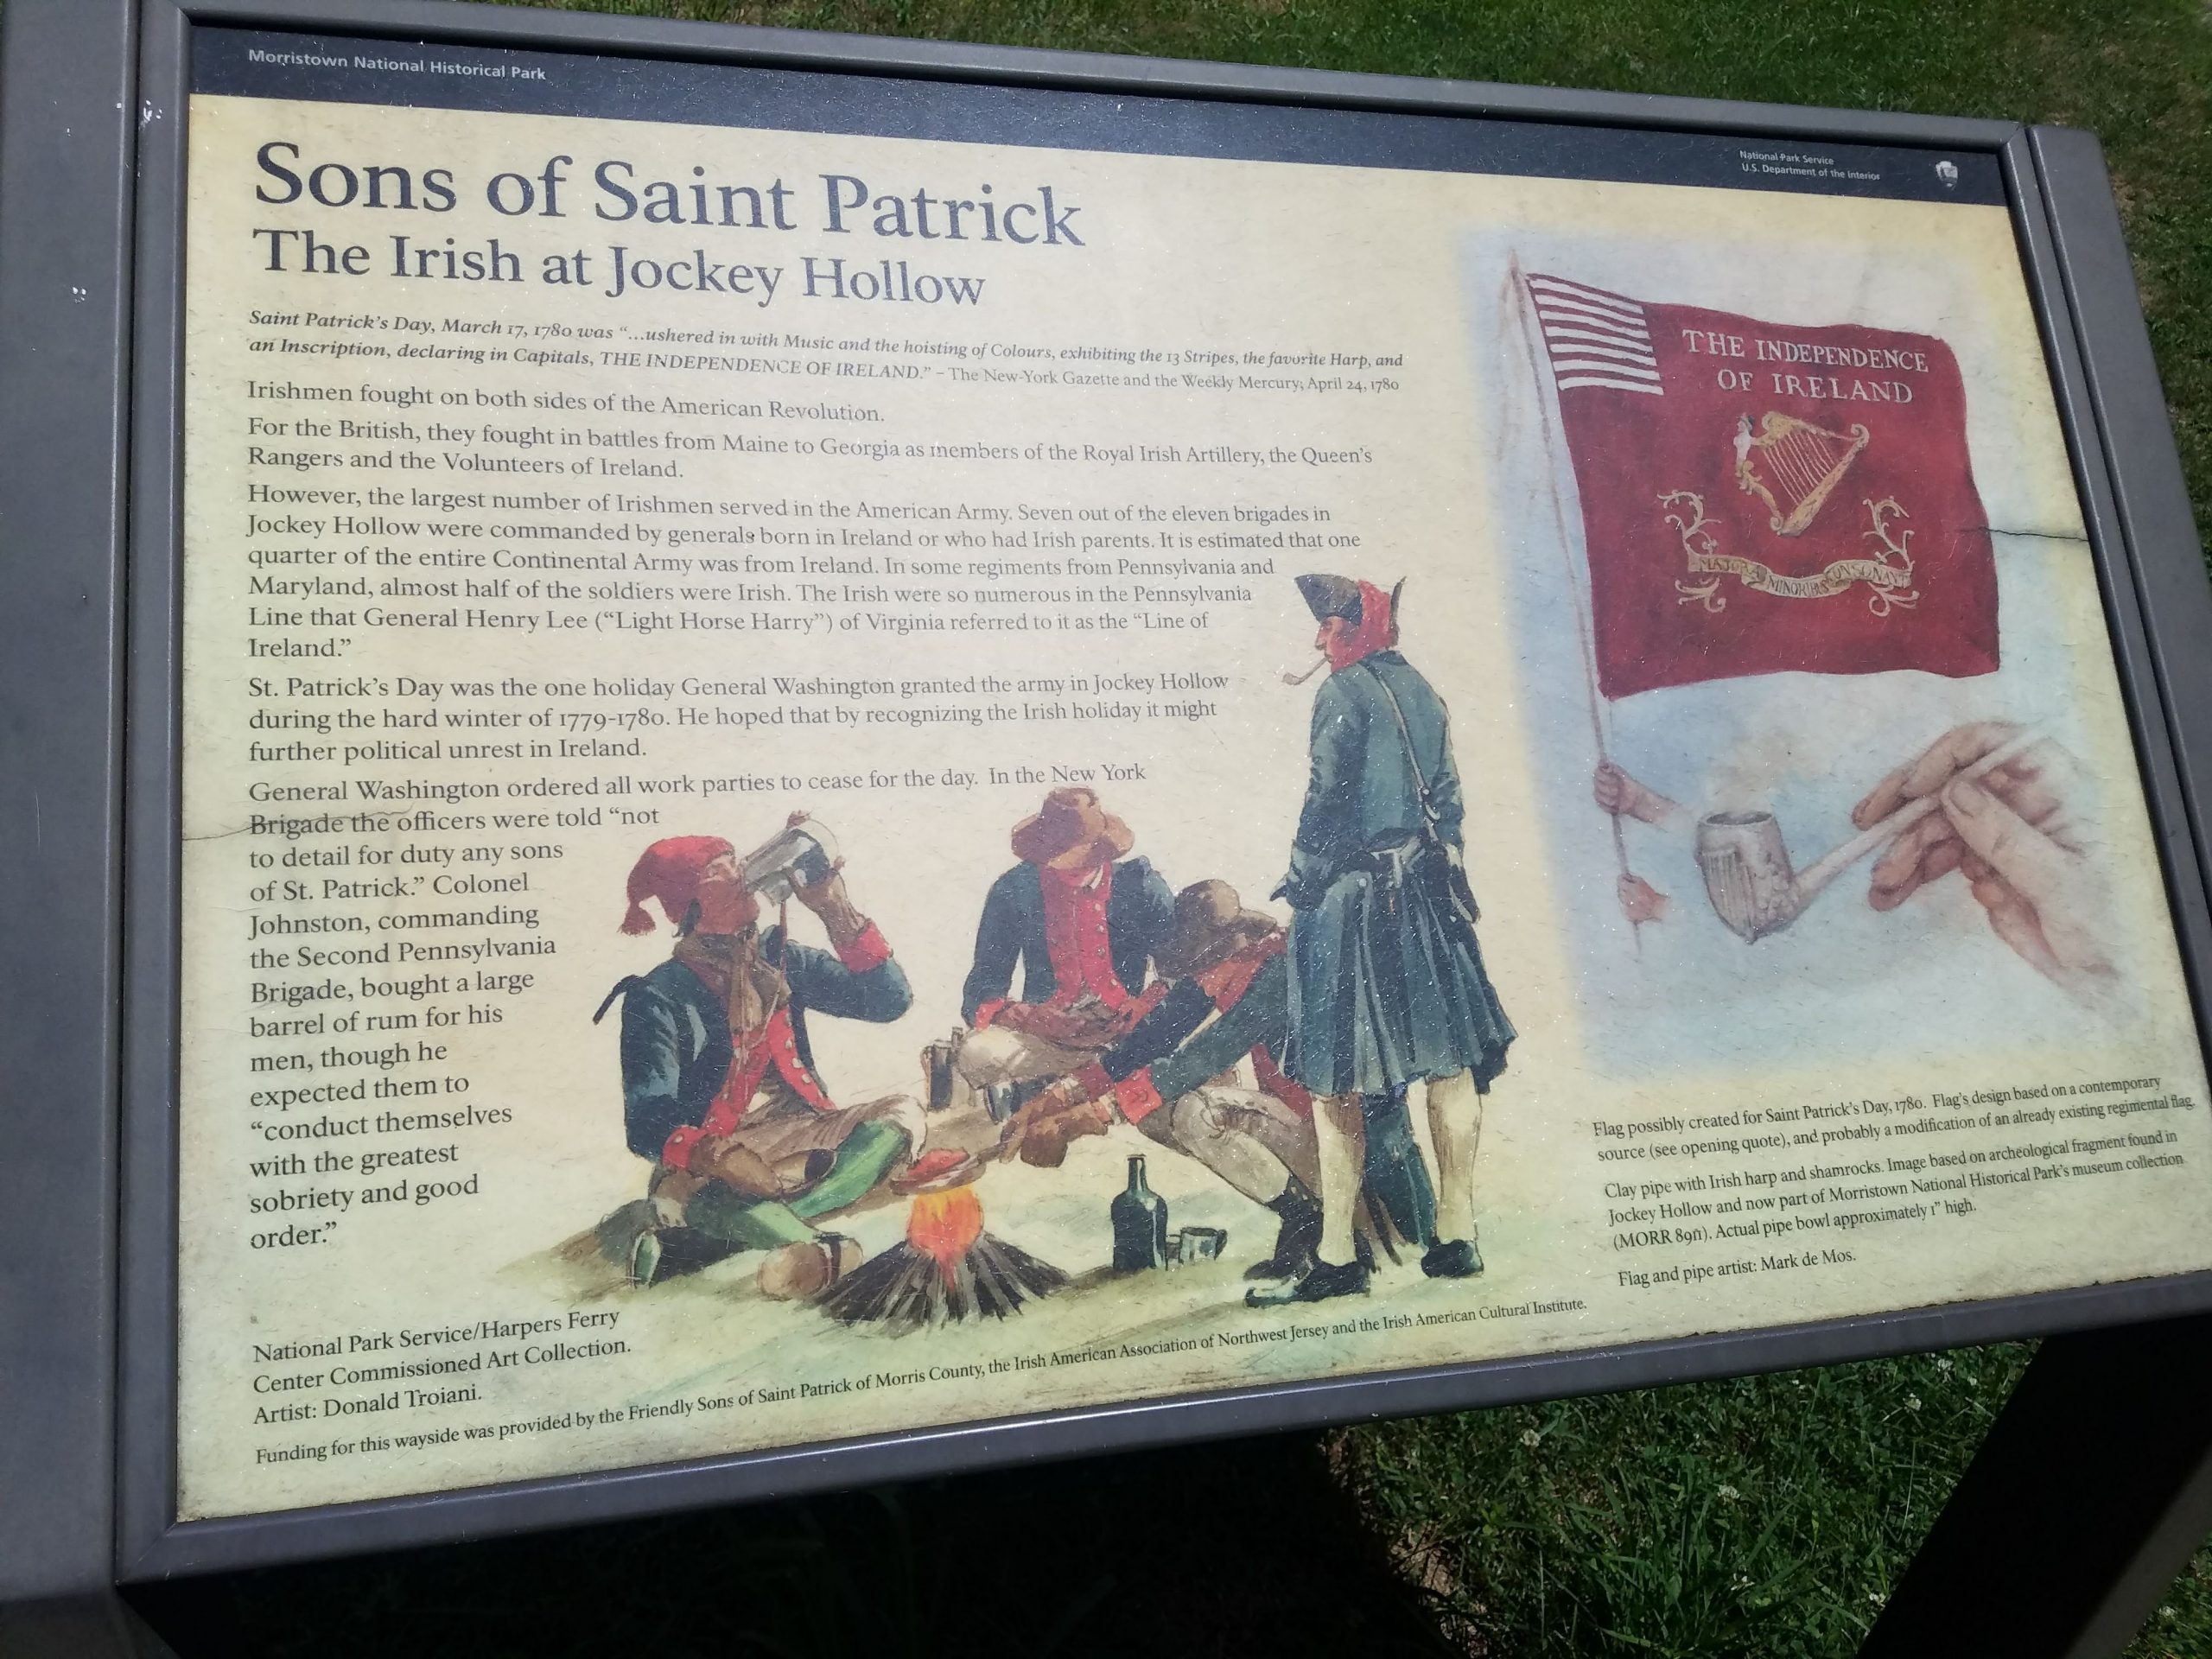 An informational sign about Irish soldiers in Jockey Hollow Park